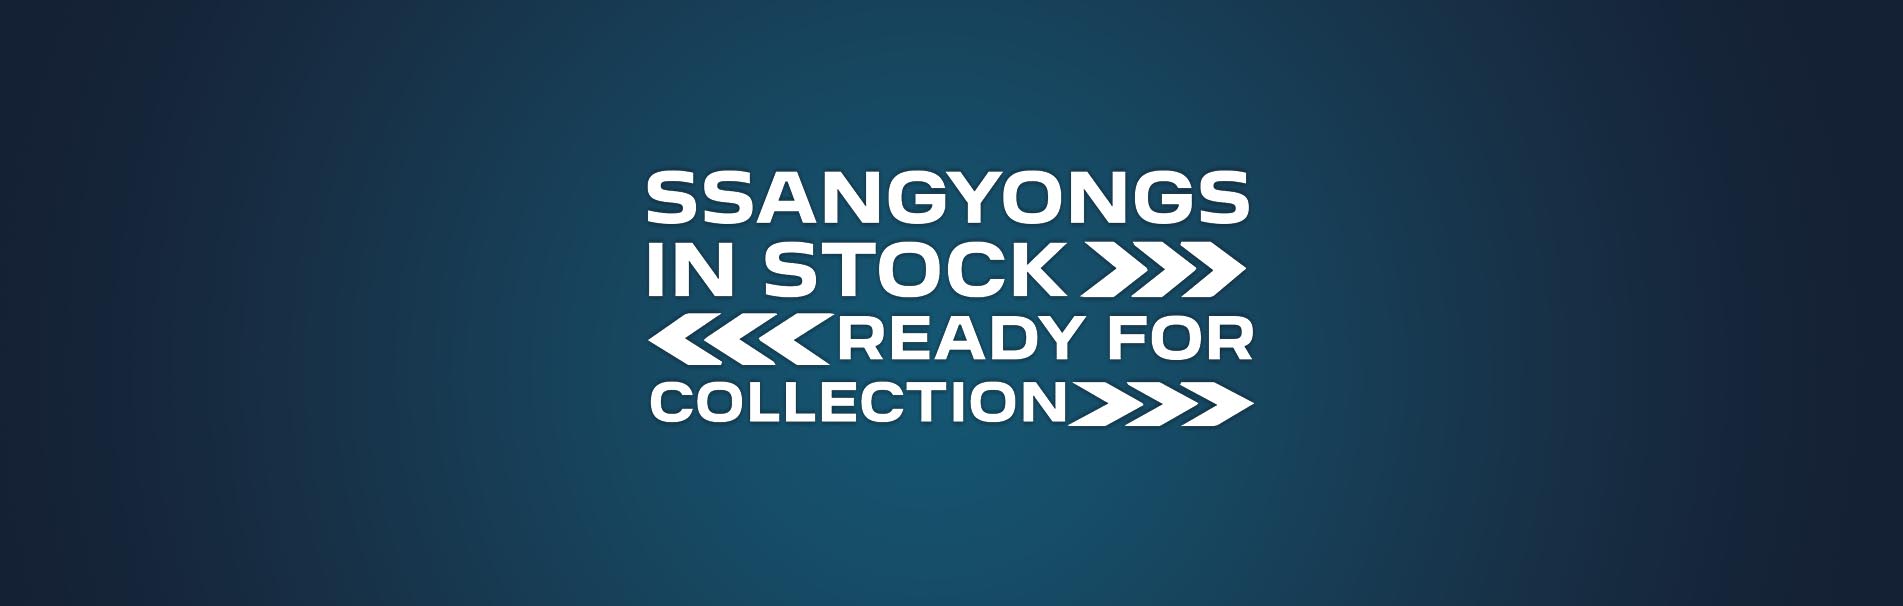 ssangyongs-in-stock-and-ready-for-collection-sli